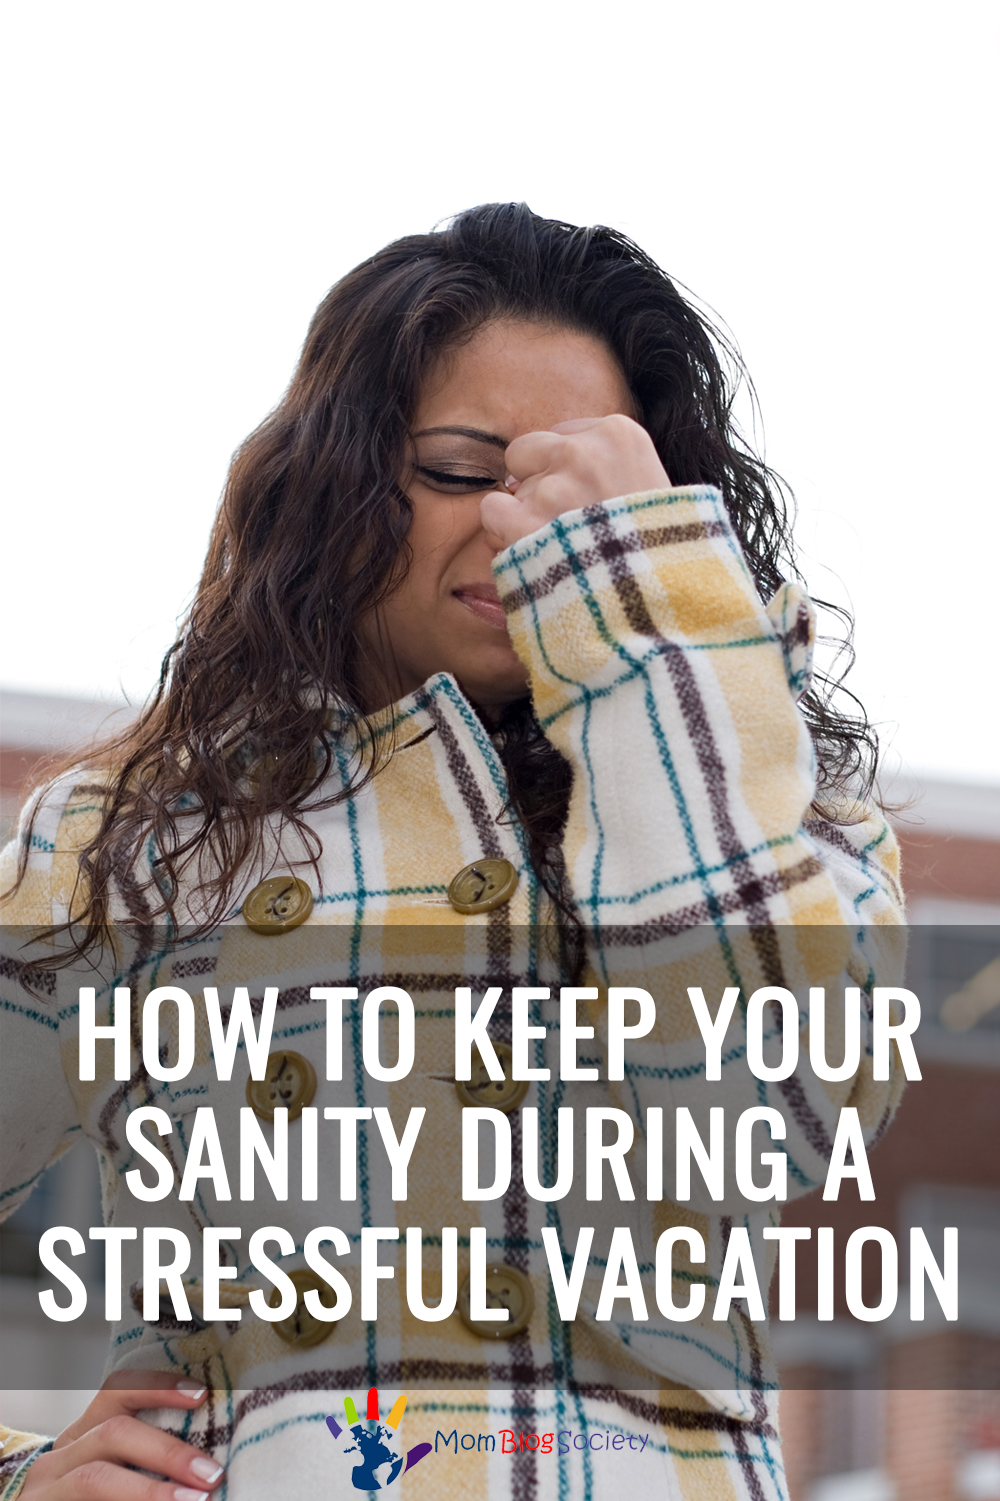 How to Keep Your Sanity During a Stressful Vacation